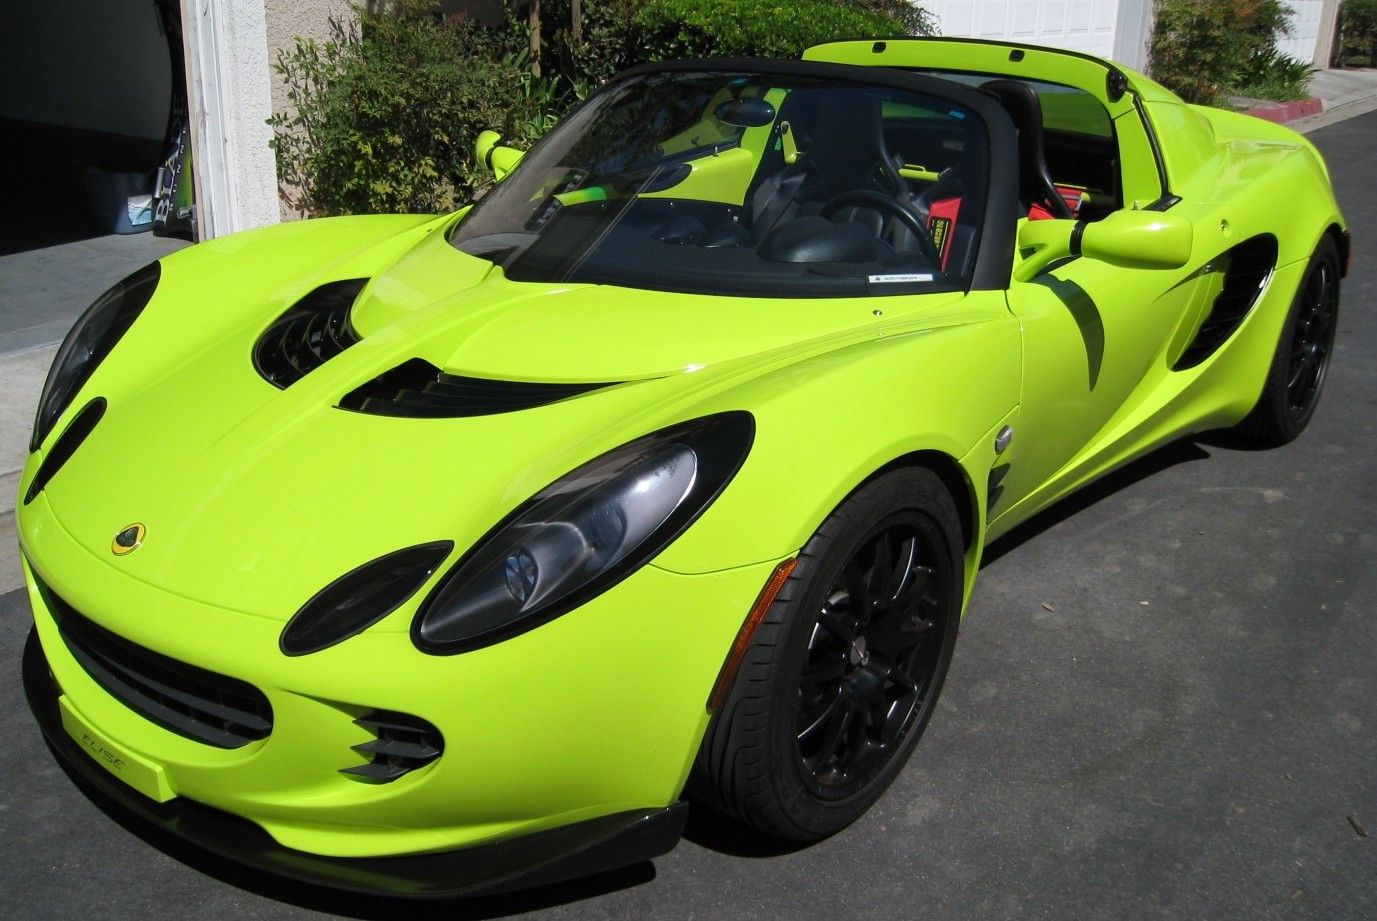 2011 Lotus Elise - Lime Green the only car that could look luxurious in  lime green | Lotus car, Lotus elise, Sexy cars